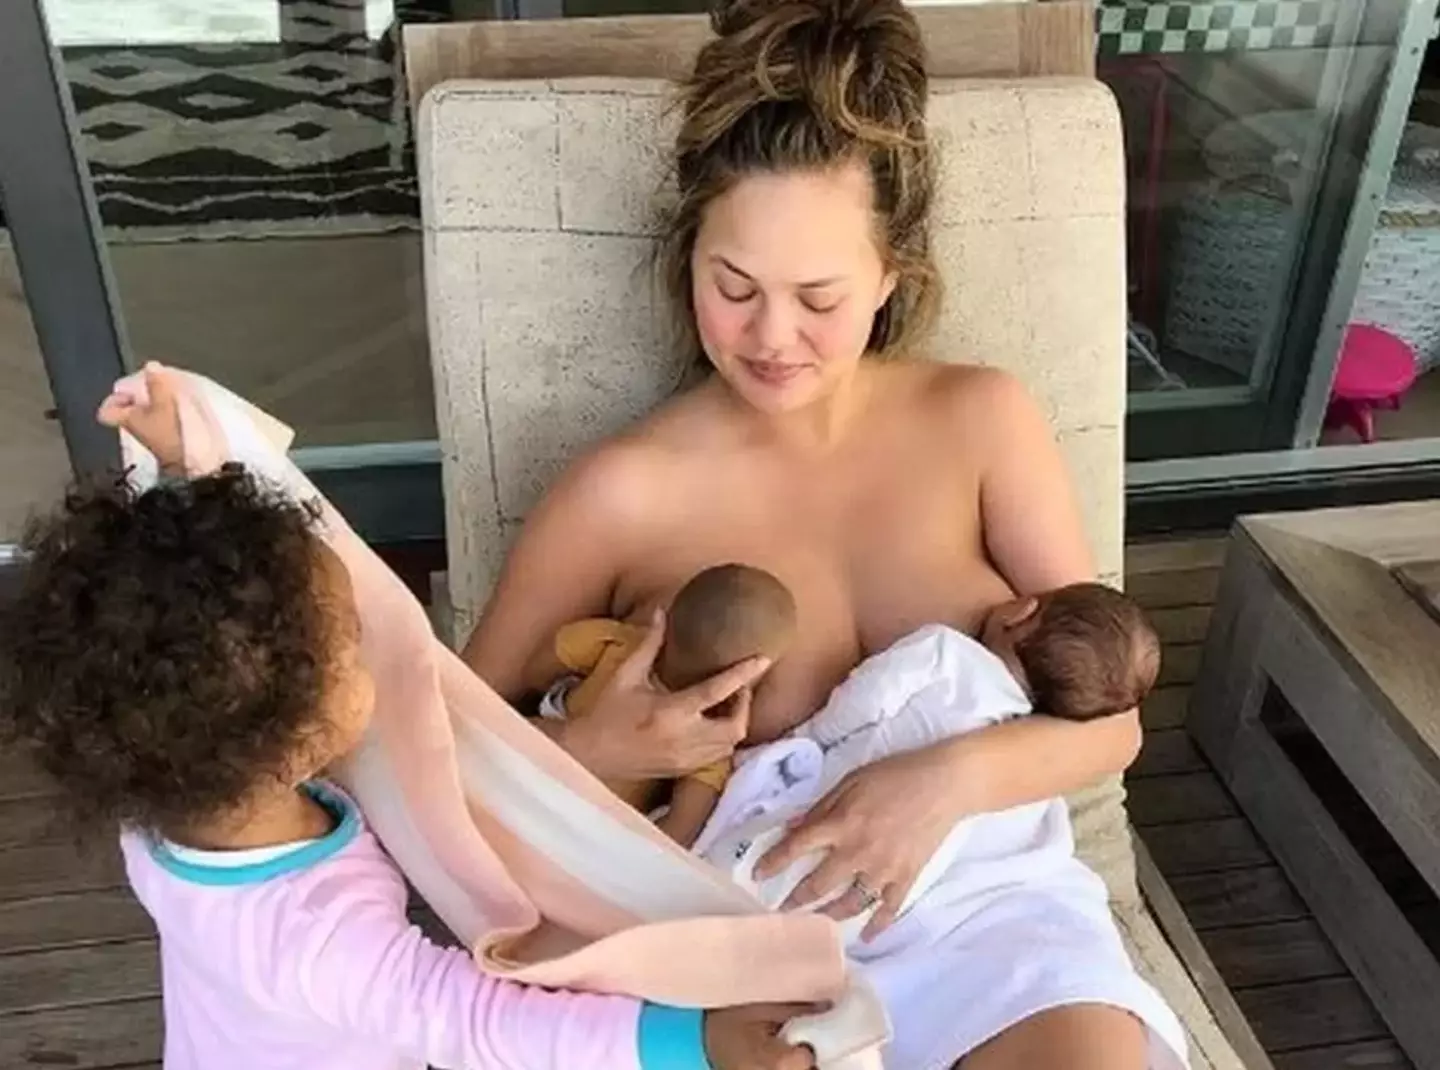 Chrissy received backlash for breastfeeding her daughter's doll.